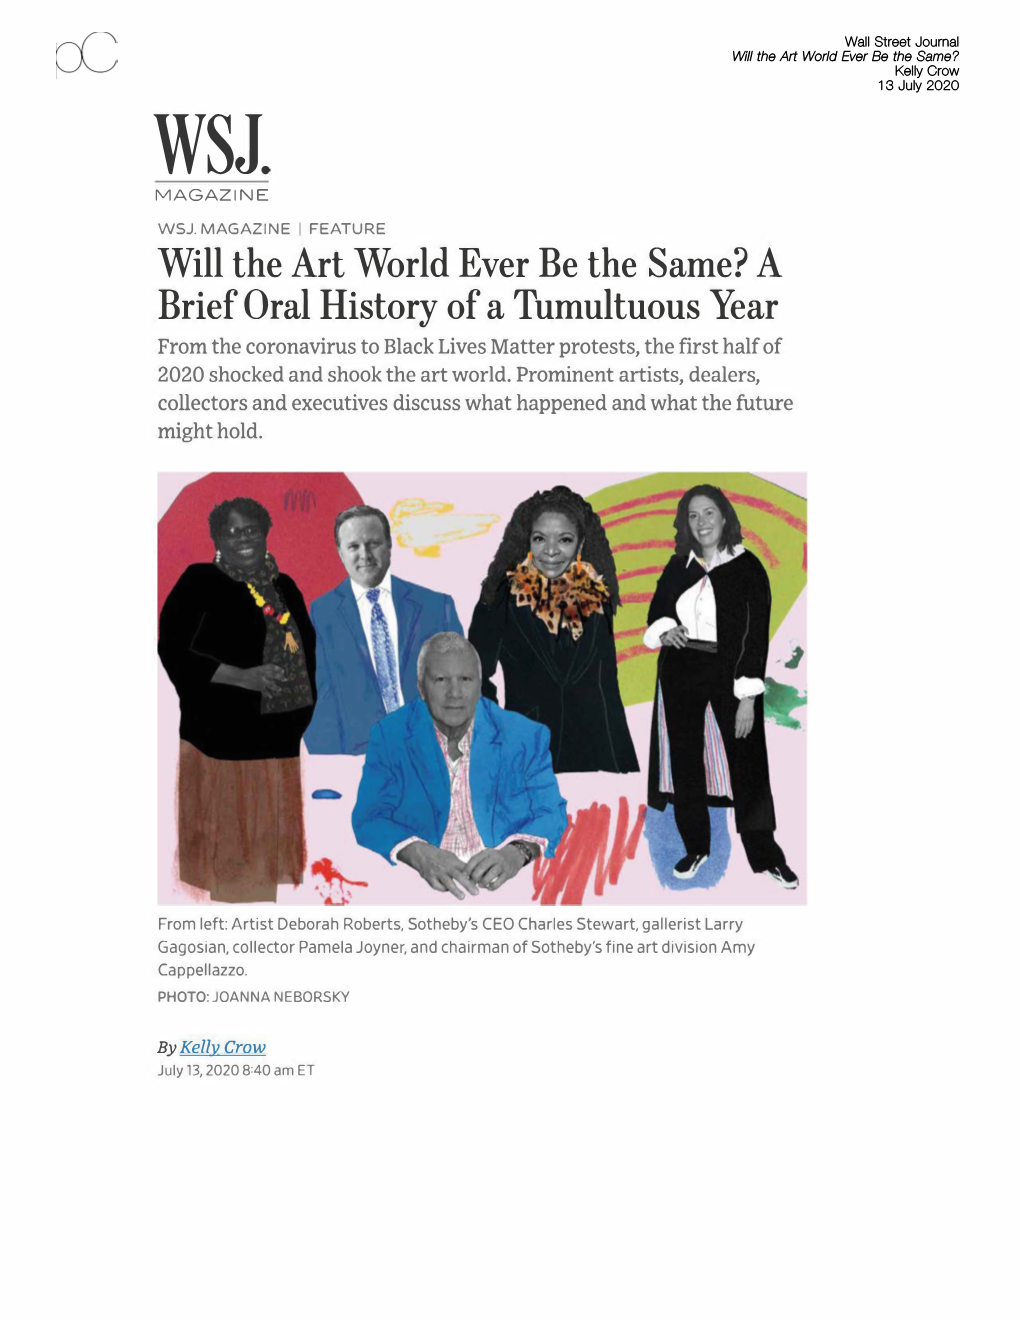 Wall Street Journal Will the Art World Ever Be the Same? 13 July 2020